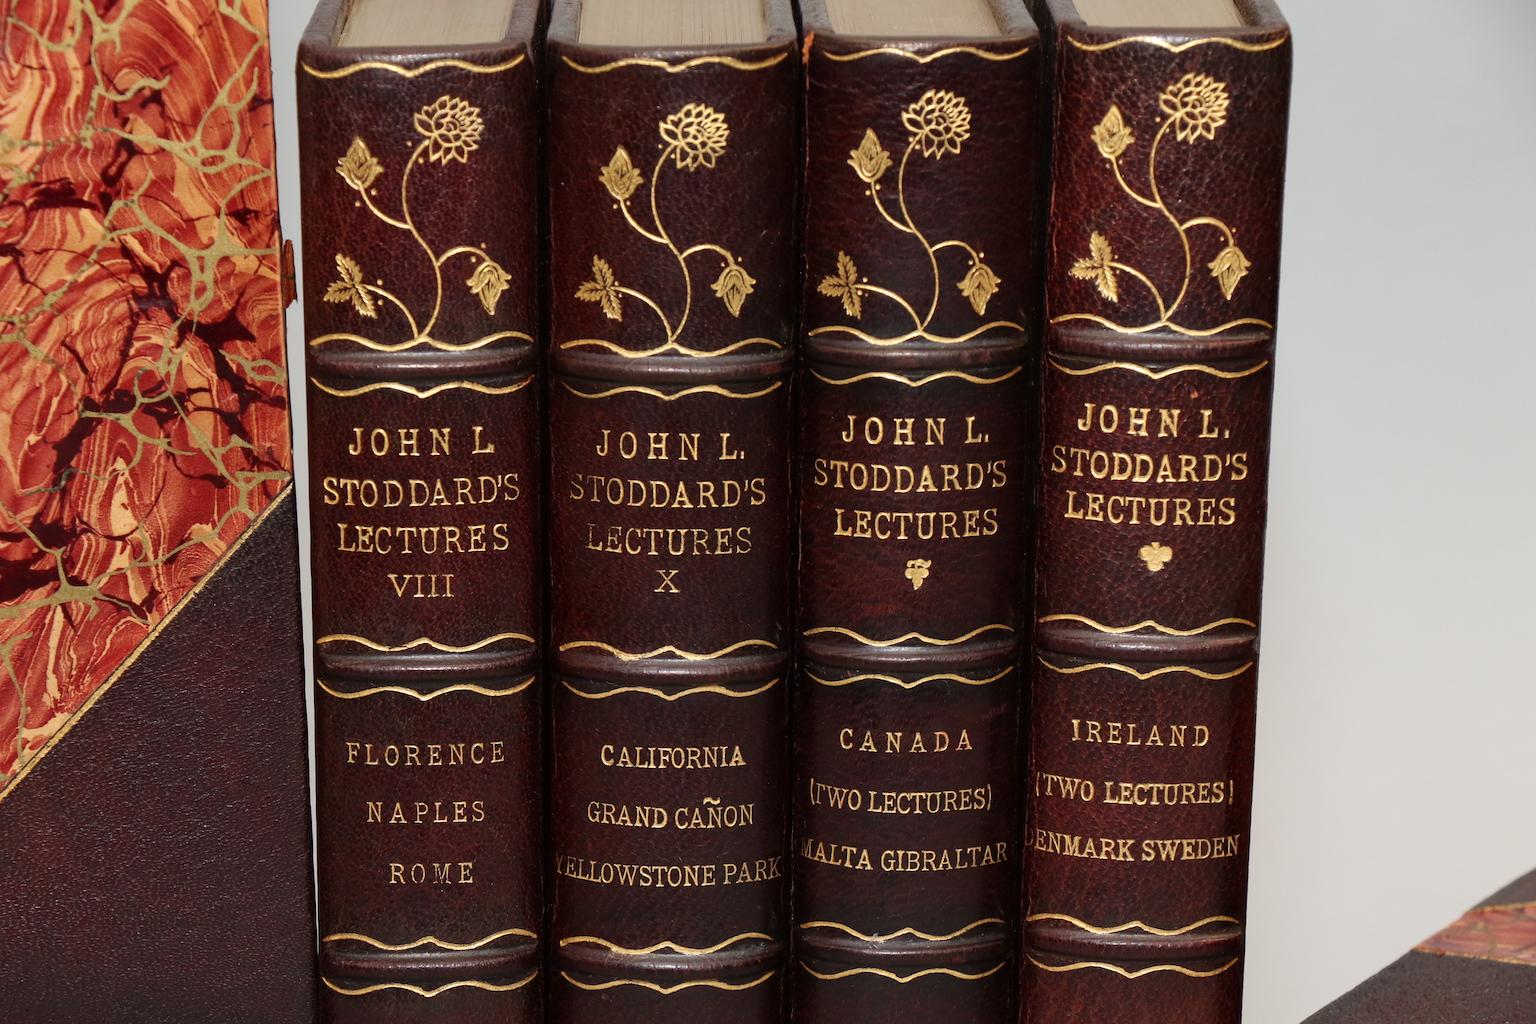 Dyed Books, John L. Stoddard's Lectures Art Edition